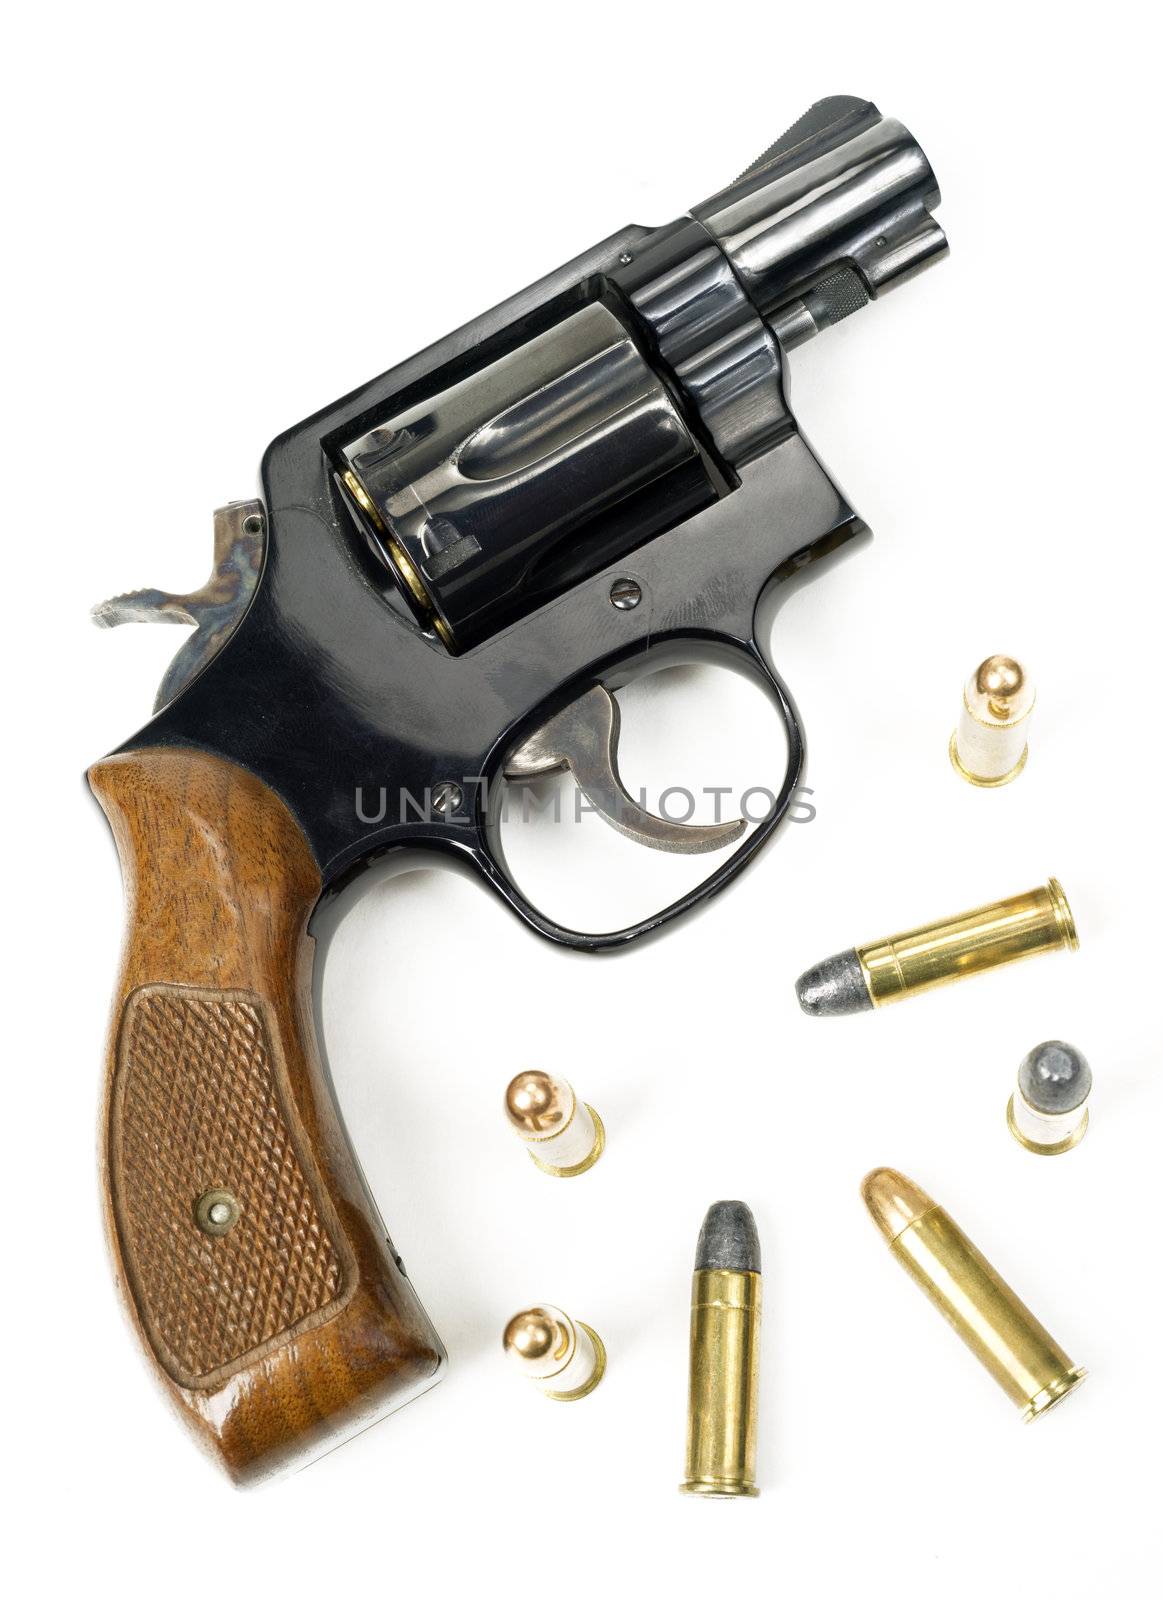 Wood Handled Revolver 38 Caliber Pistol Loaded Laying With Bulli by ChrisBoswell